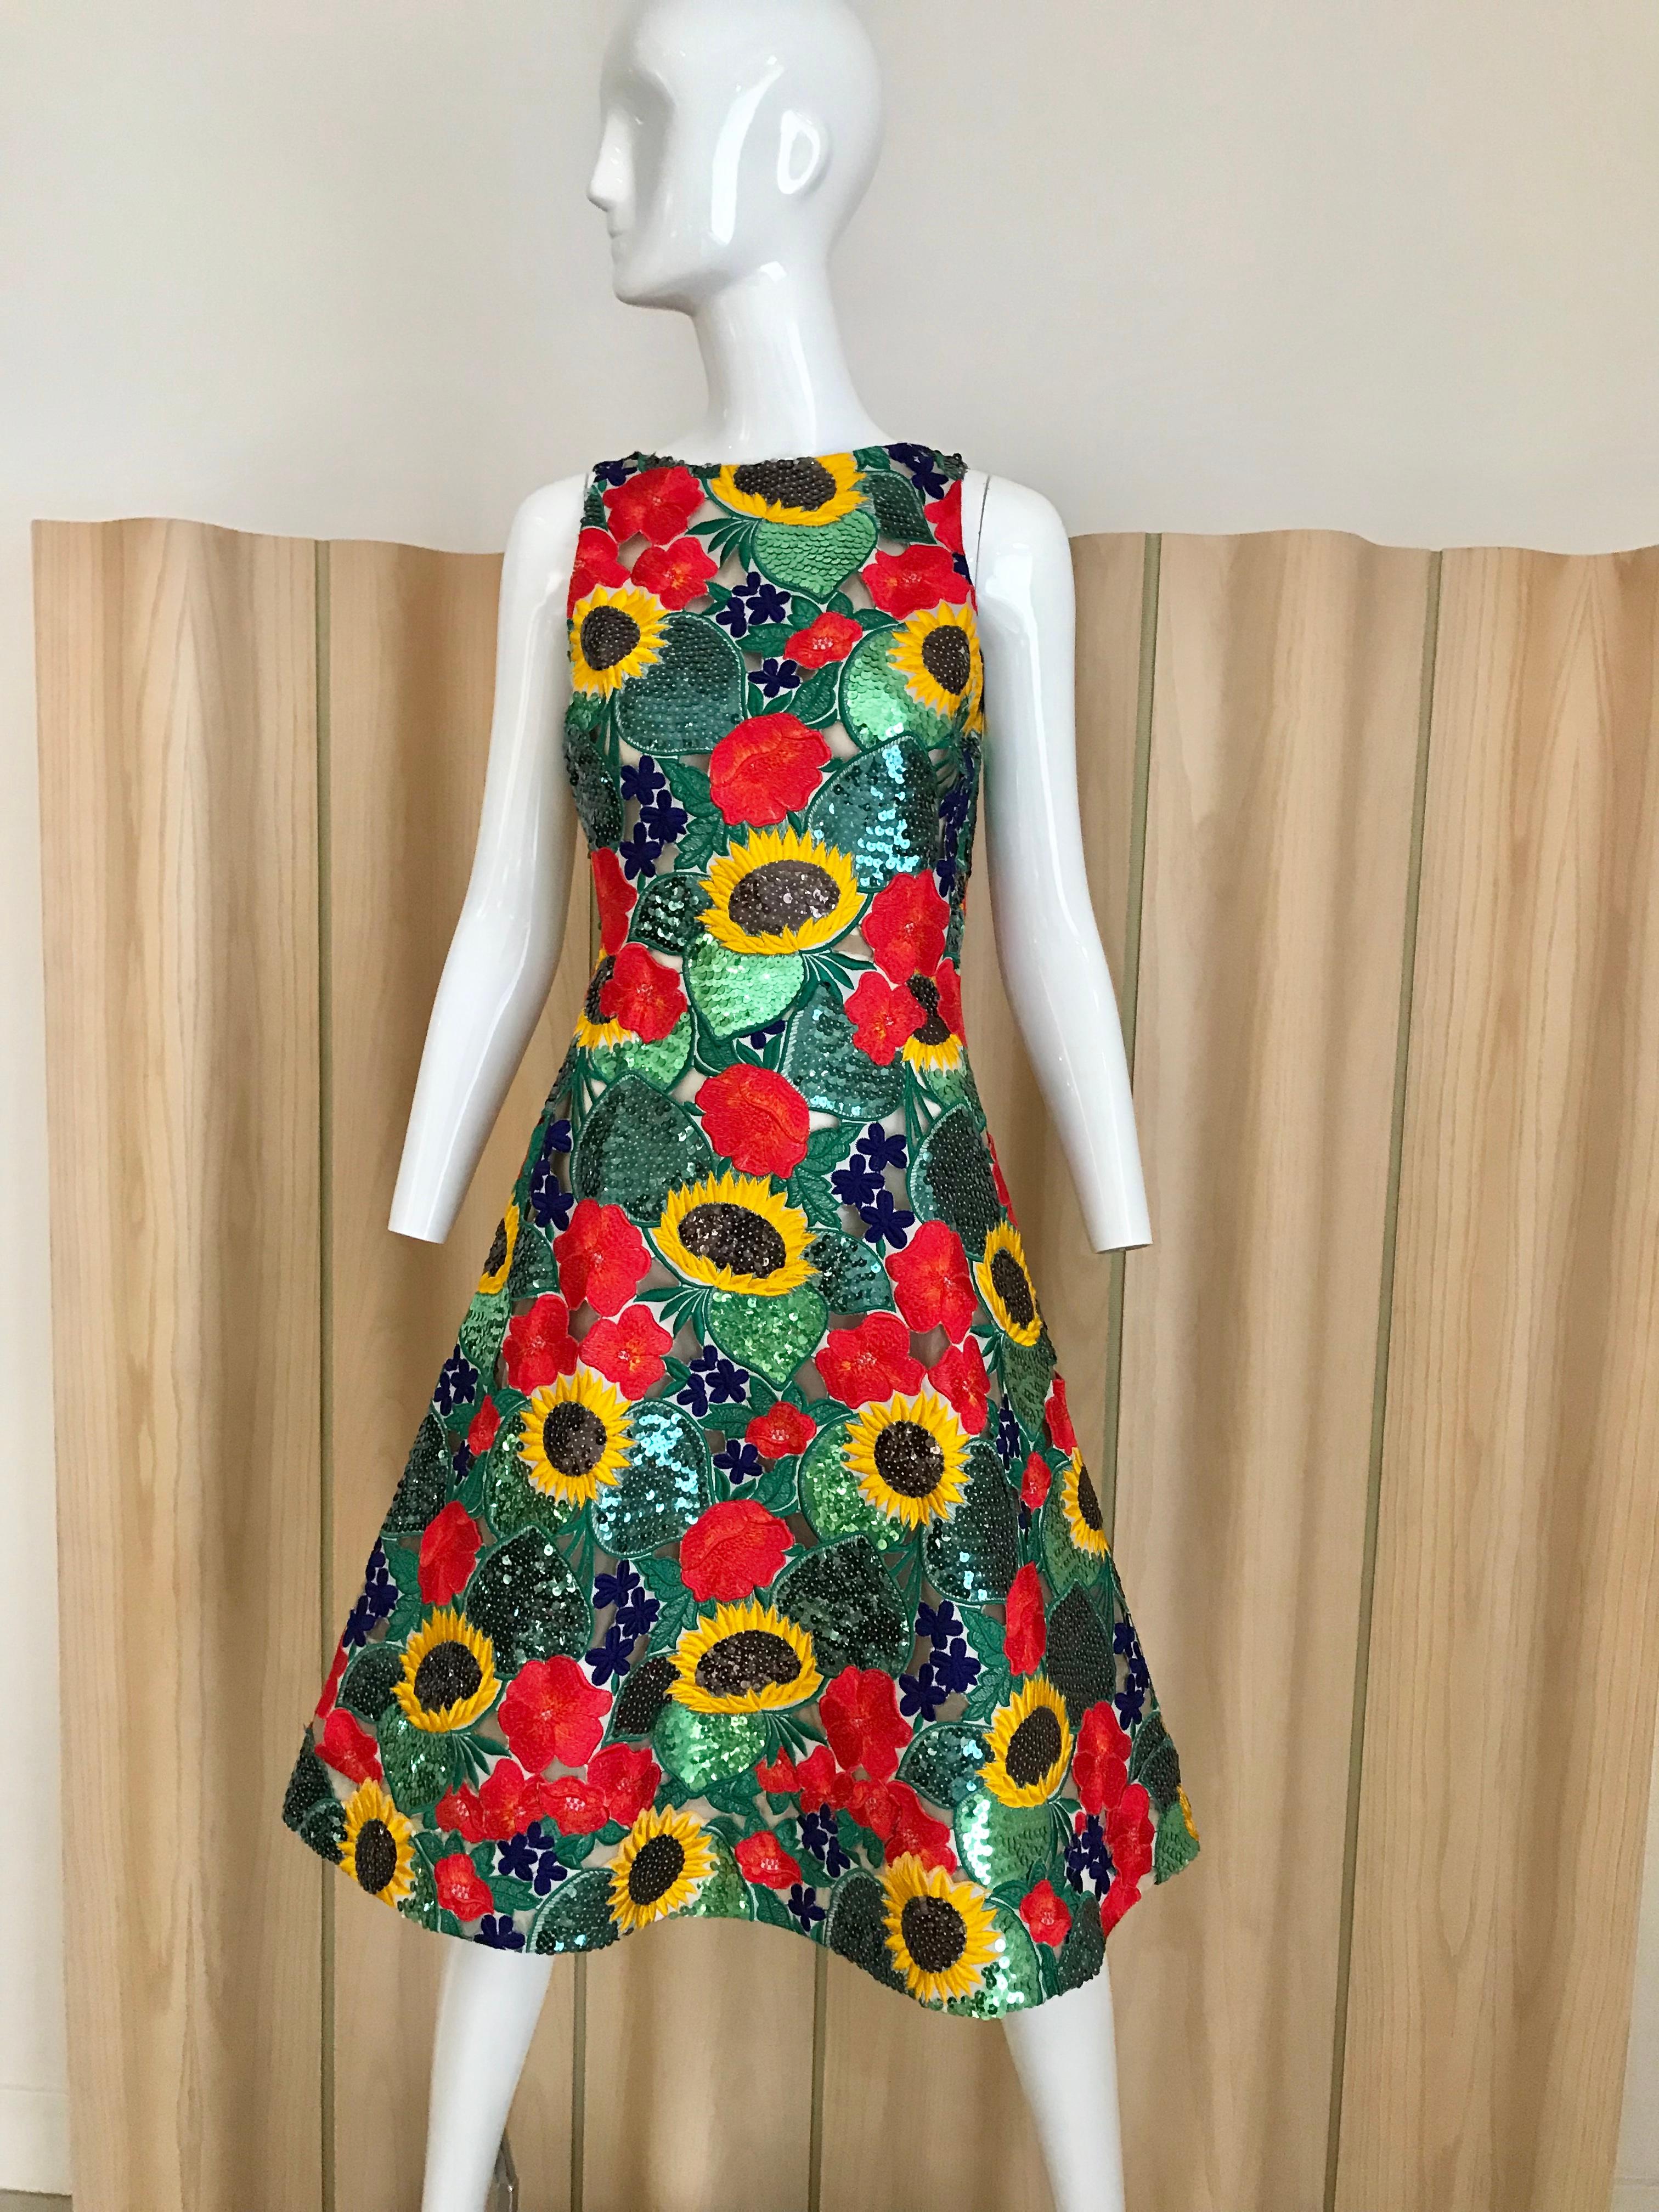 Green and red sunflower sequins sleeveless cocktail dress. 
Fitted at the waist with flair hem. Dress is lined in silk.
Bust: 34 inches/ Waist: 27inches